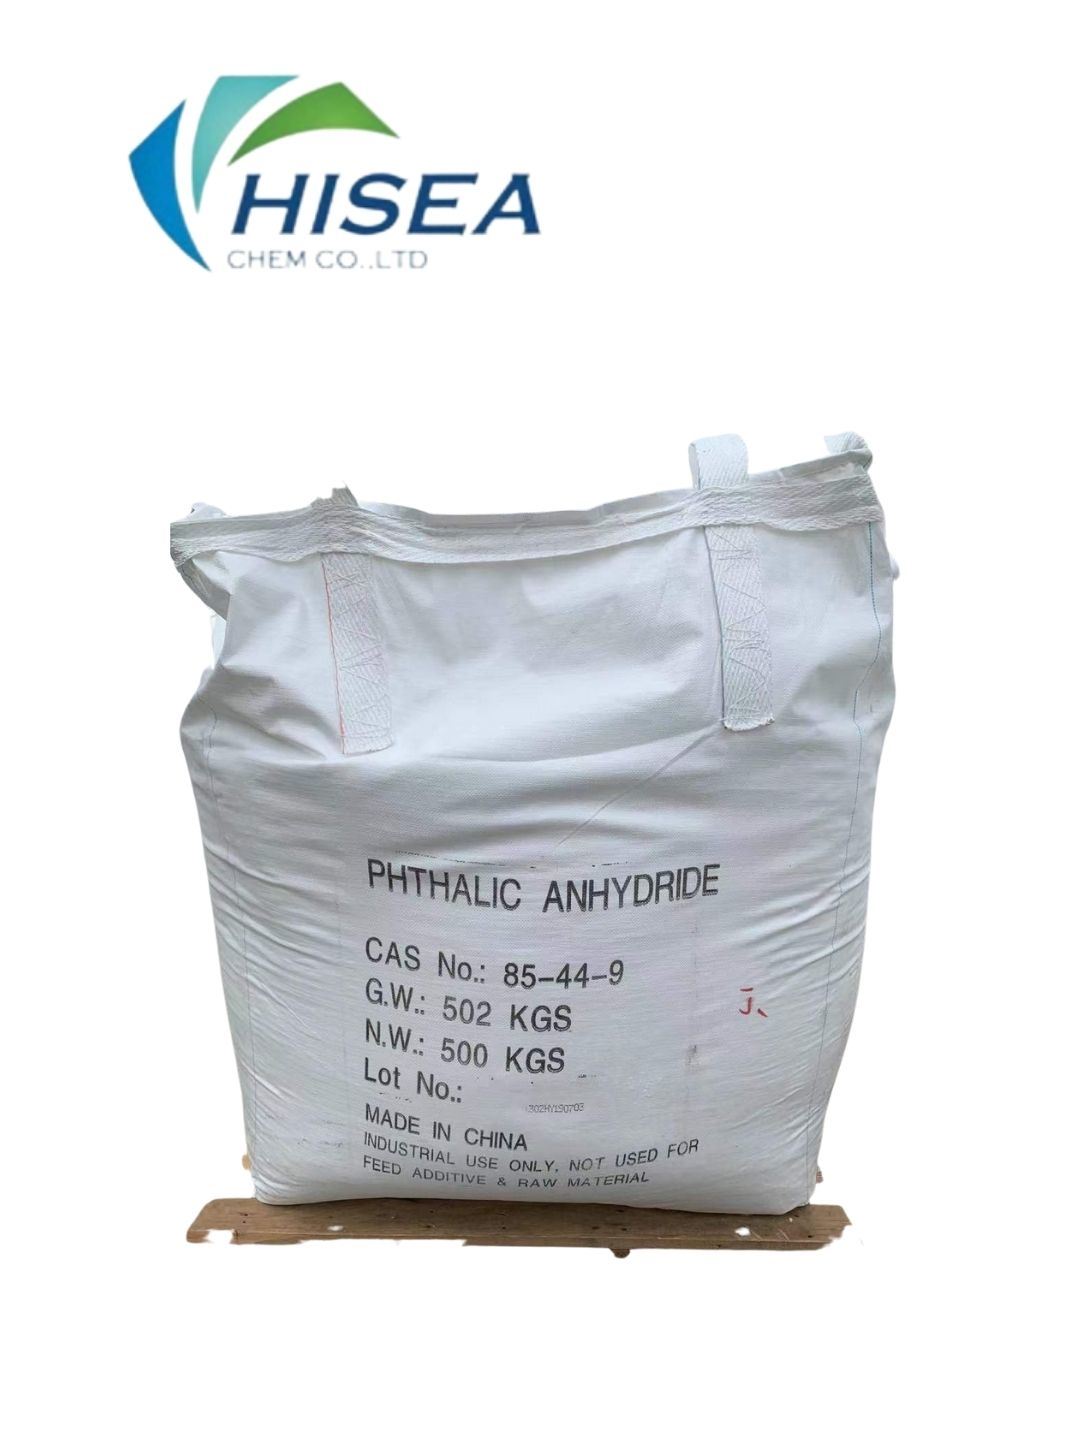 Industrial Grade Phthalic anhydride